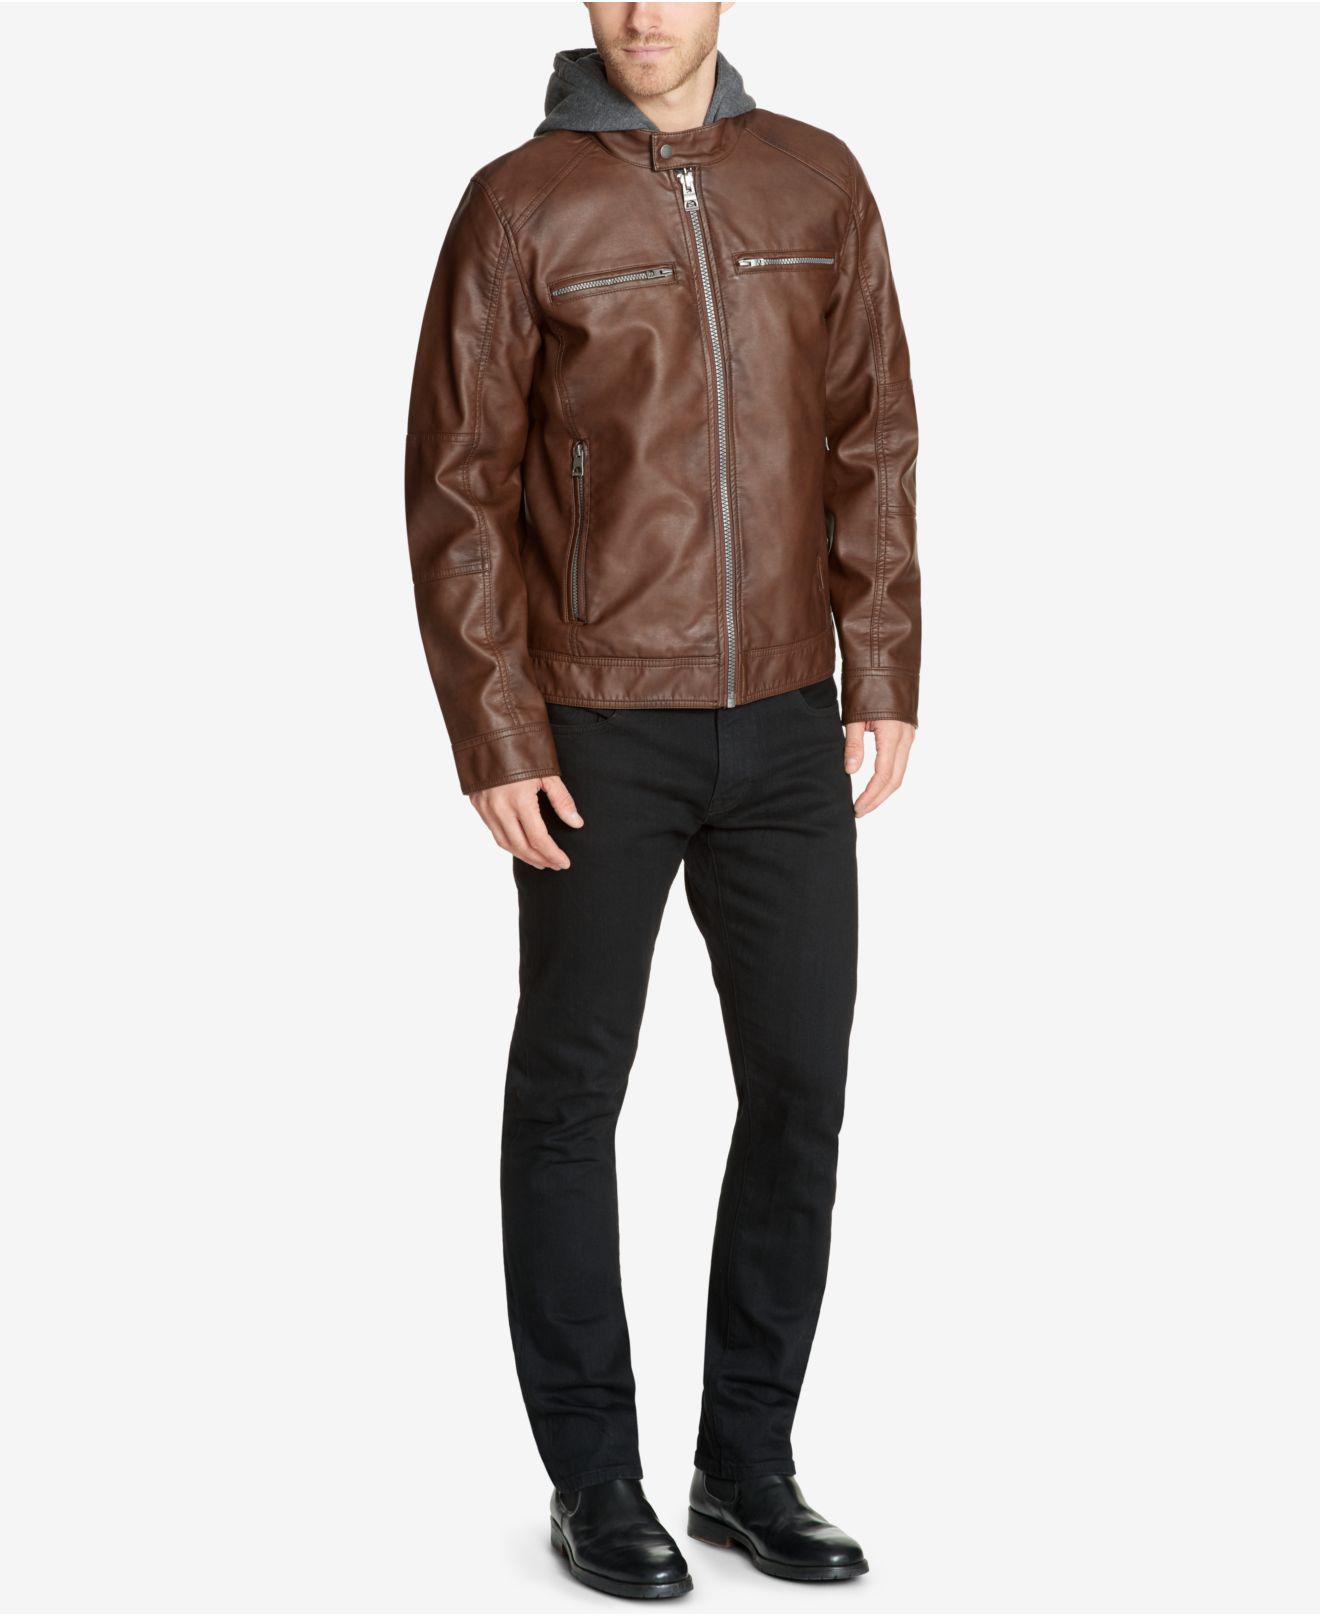 Guess Men's Faux-leather Detachable-hood Motorcycle Jacket in Brown for